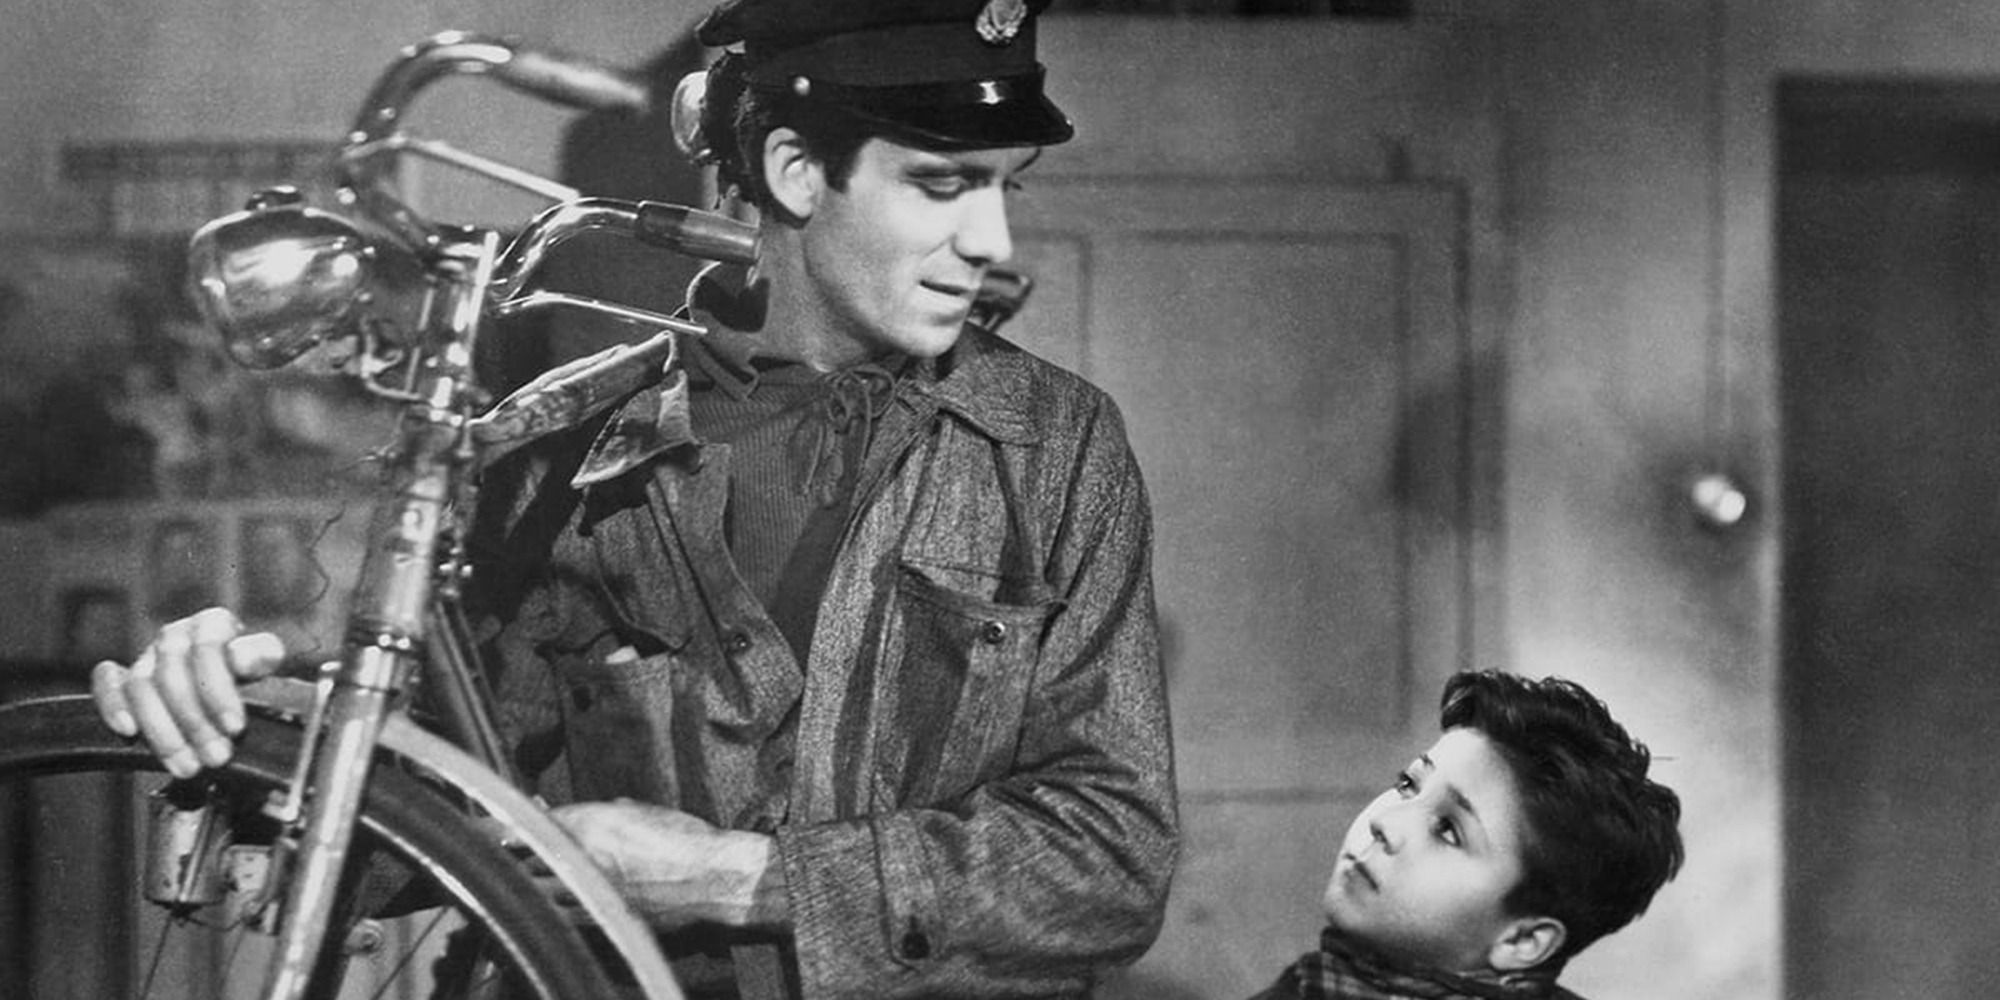 Antonio and Bruno from "Bicycle Thieves", Antonio holding a bike and Bruno looking up at him